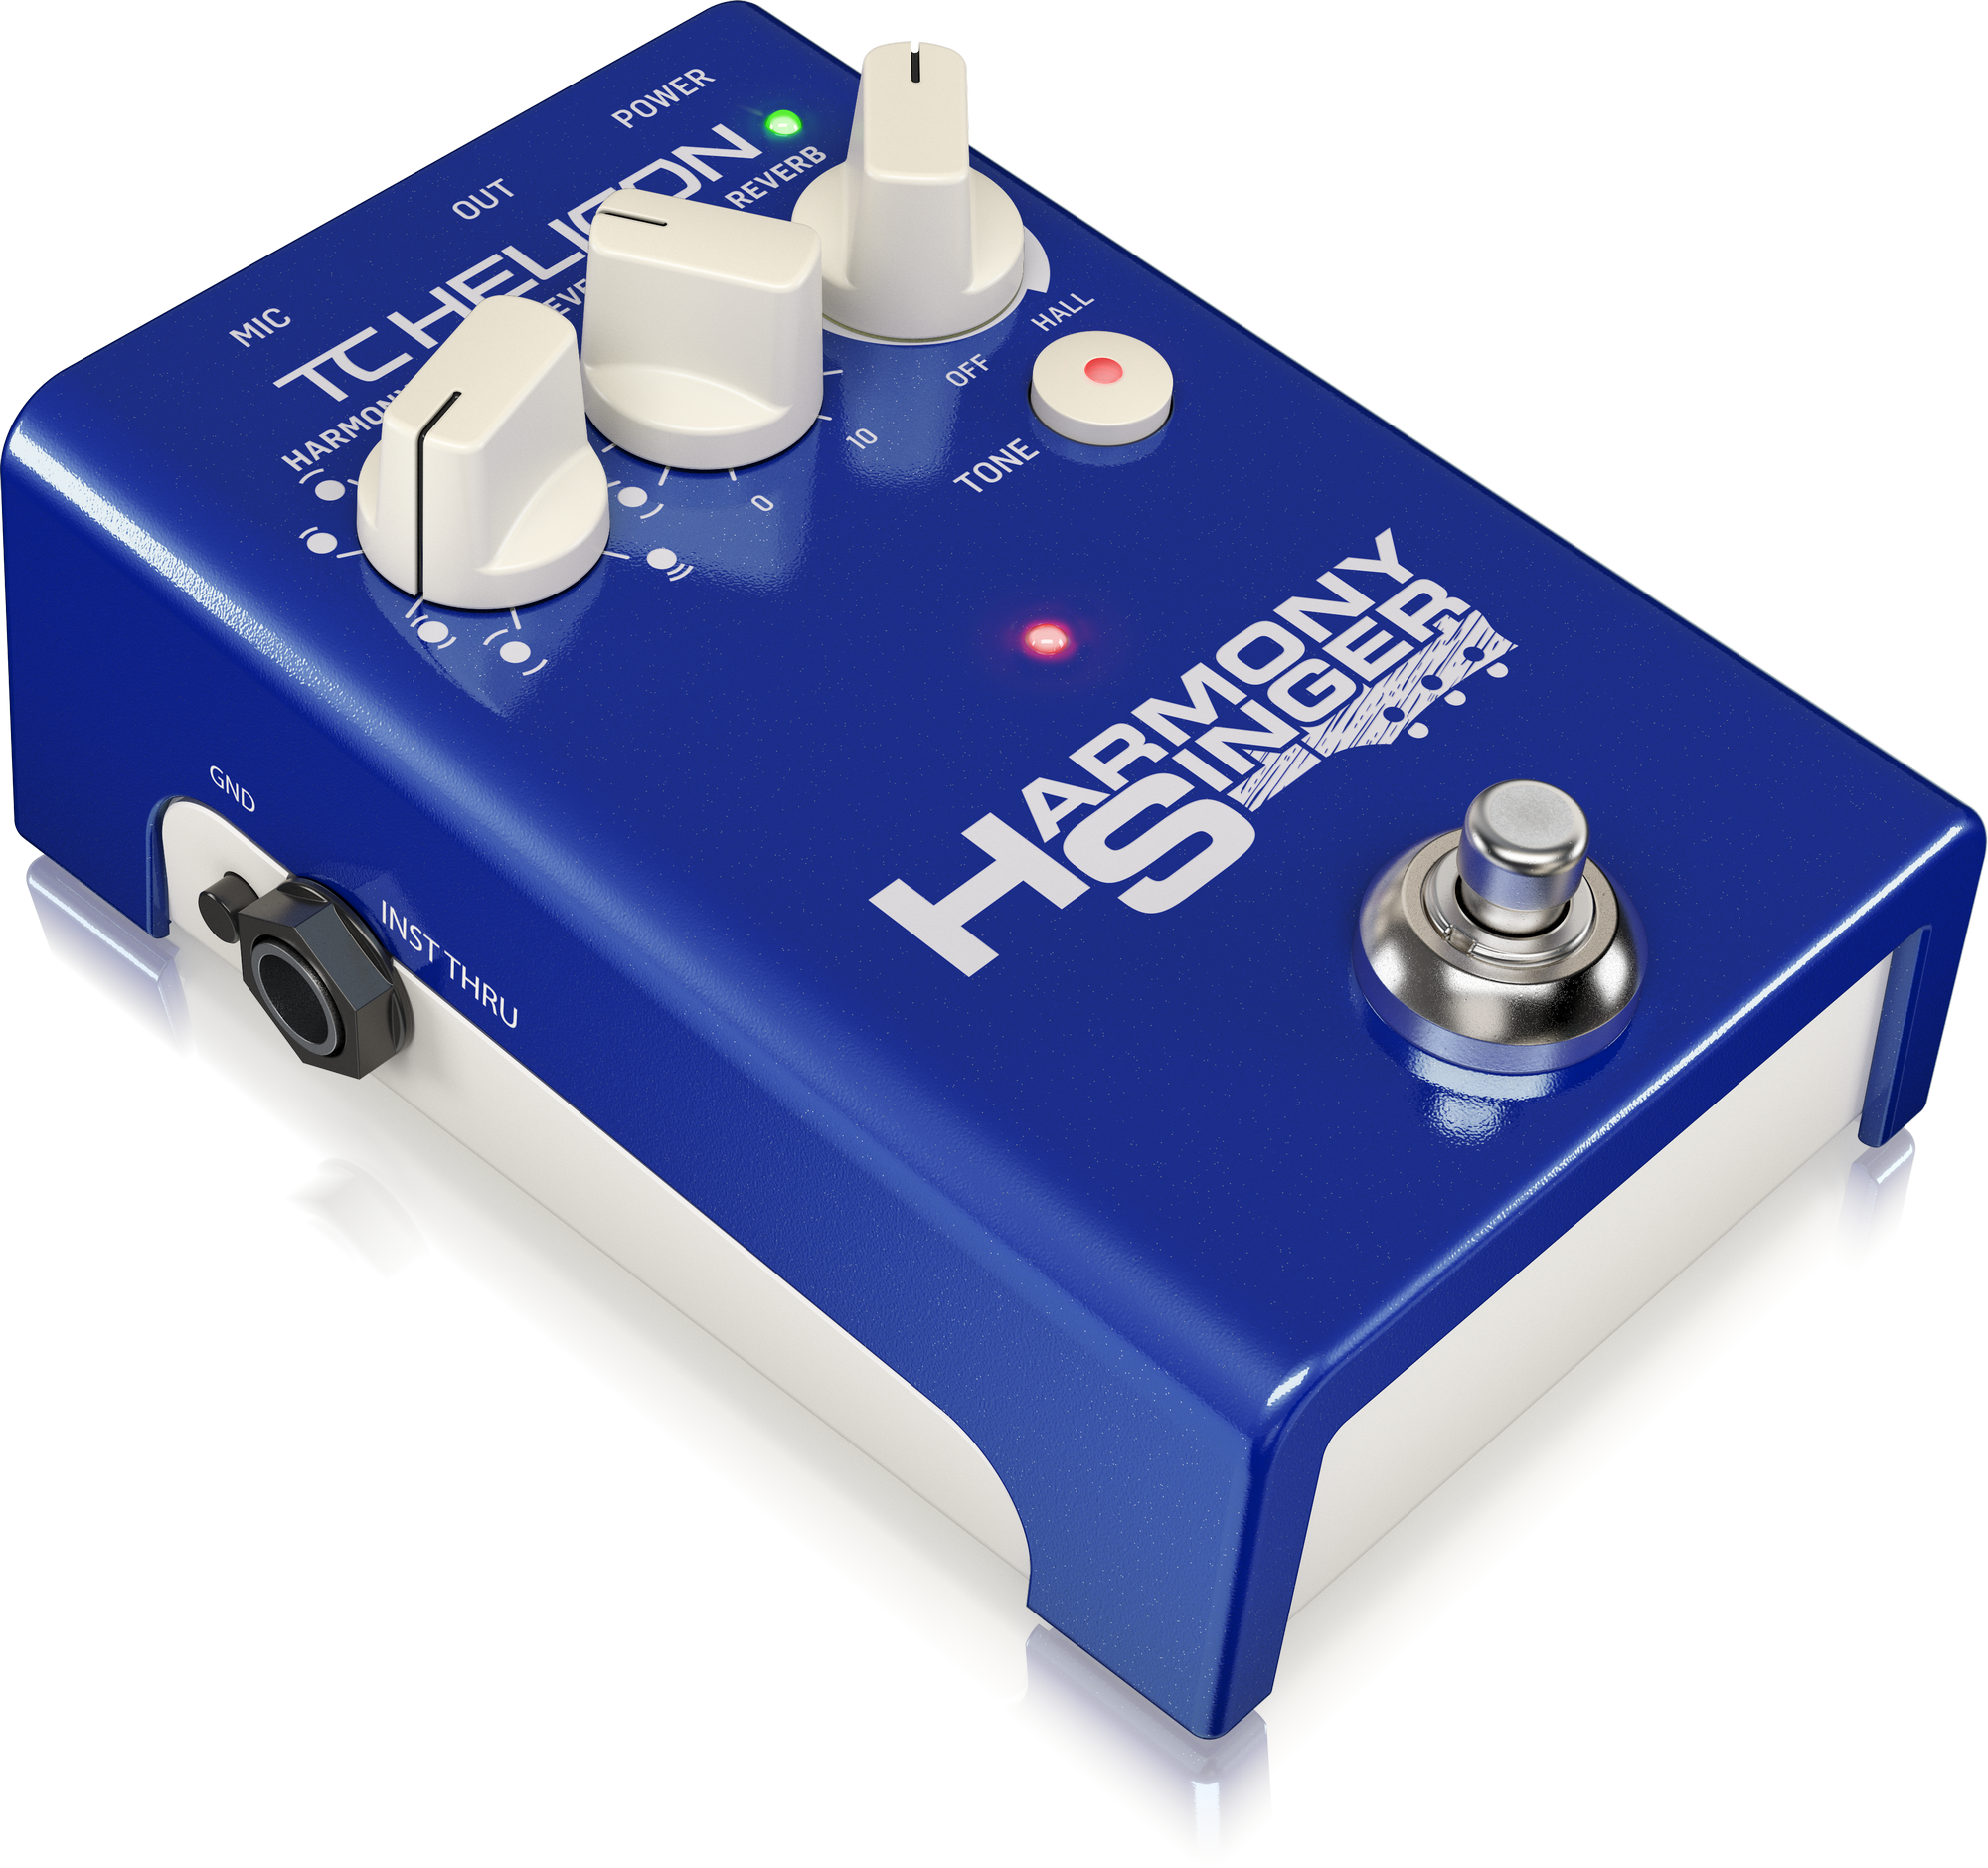 TC HELICON HARMONY SINGER 2 BATTERY-POWERED VOCAL EFFECTS STOMPBOX WITH GUITAR-CONTROLLED HARMONY, REVERB AND TONE, TC HELICON, VOCAL PROCESSORS, tc-helicon-vocal-processors-harmony-singer-2, ZOSO MUSIC SDN BHD